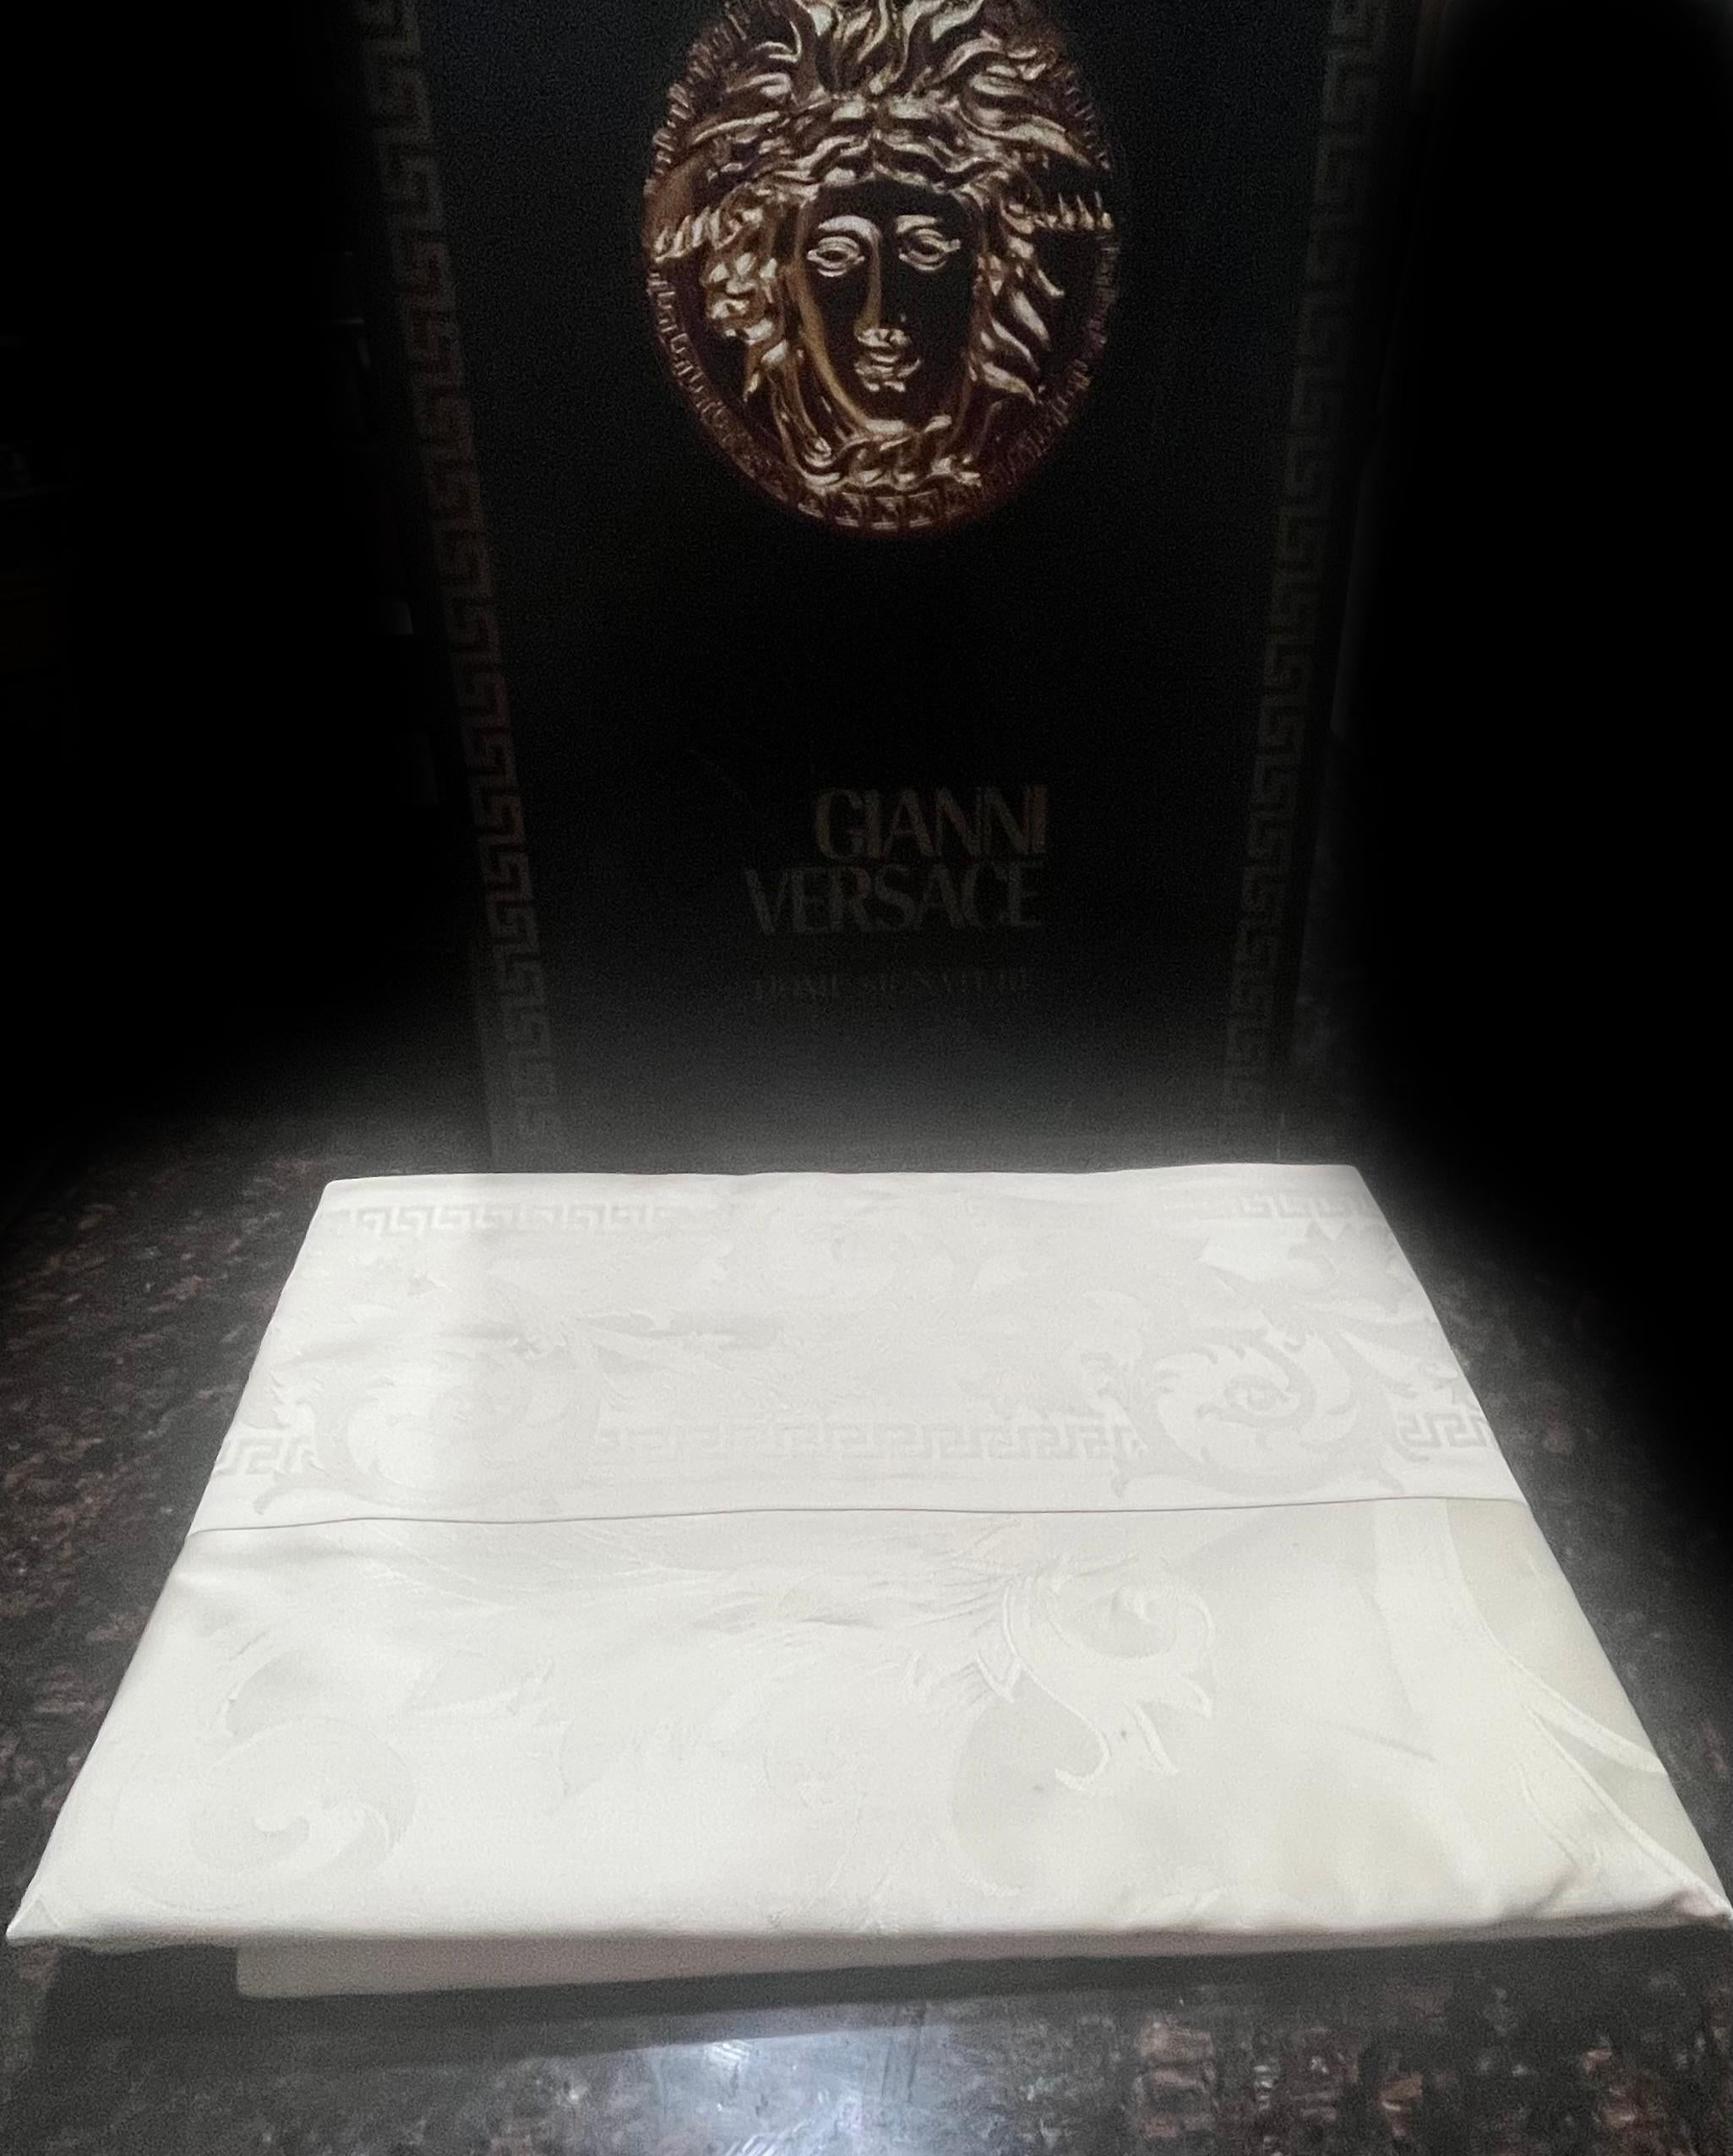 90-S VINTAGE RARE GIANNI VERSACE HOME COLLECTION TABLECLOTH Sz 110x75 in In New Condition For Sale In Montgomery, TX